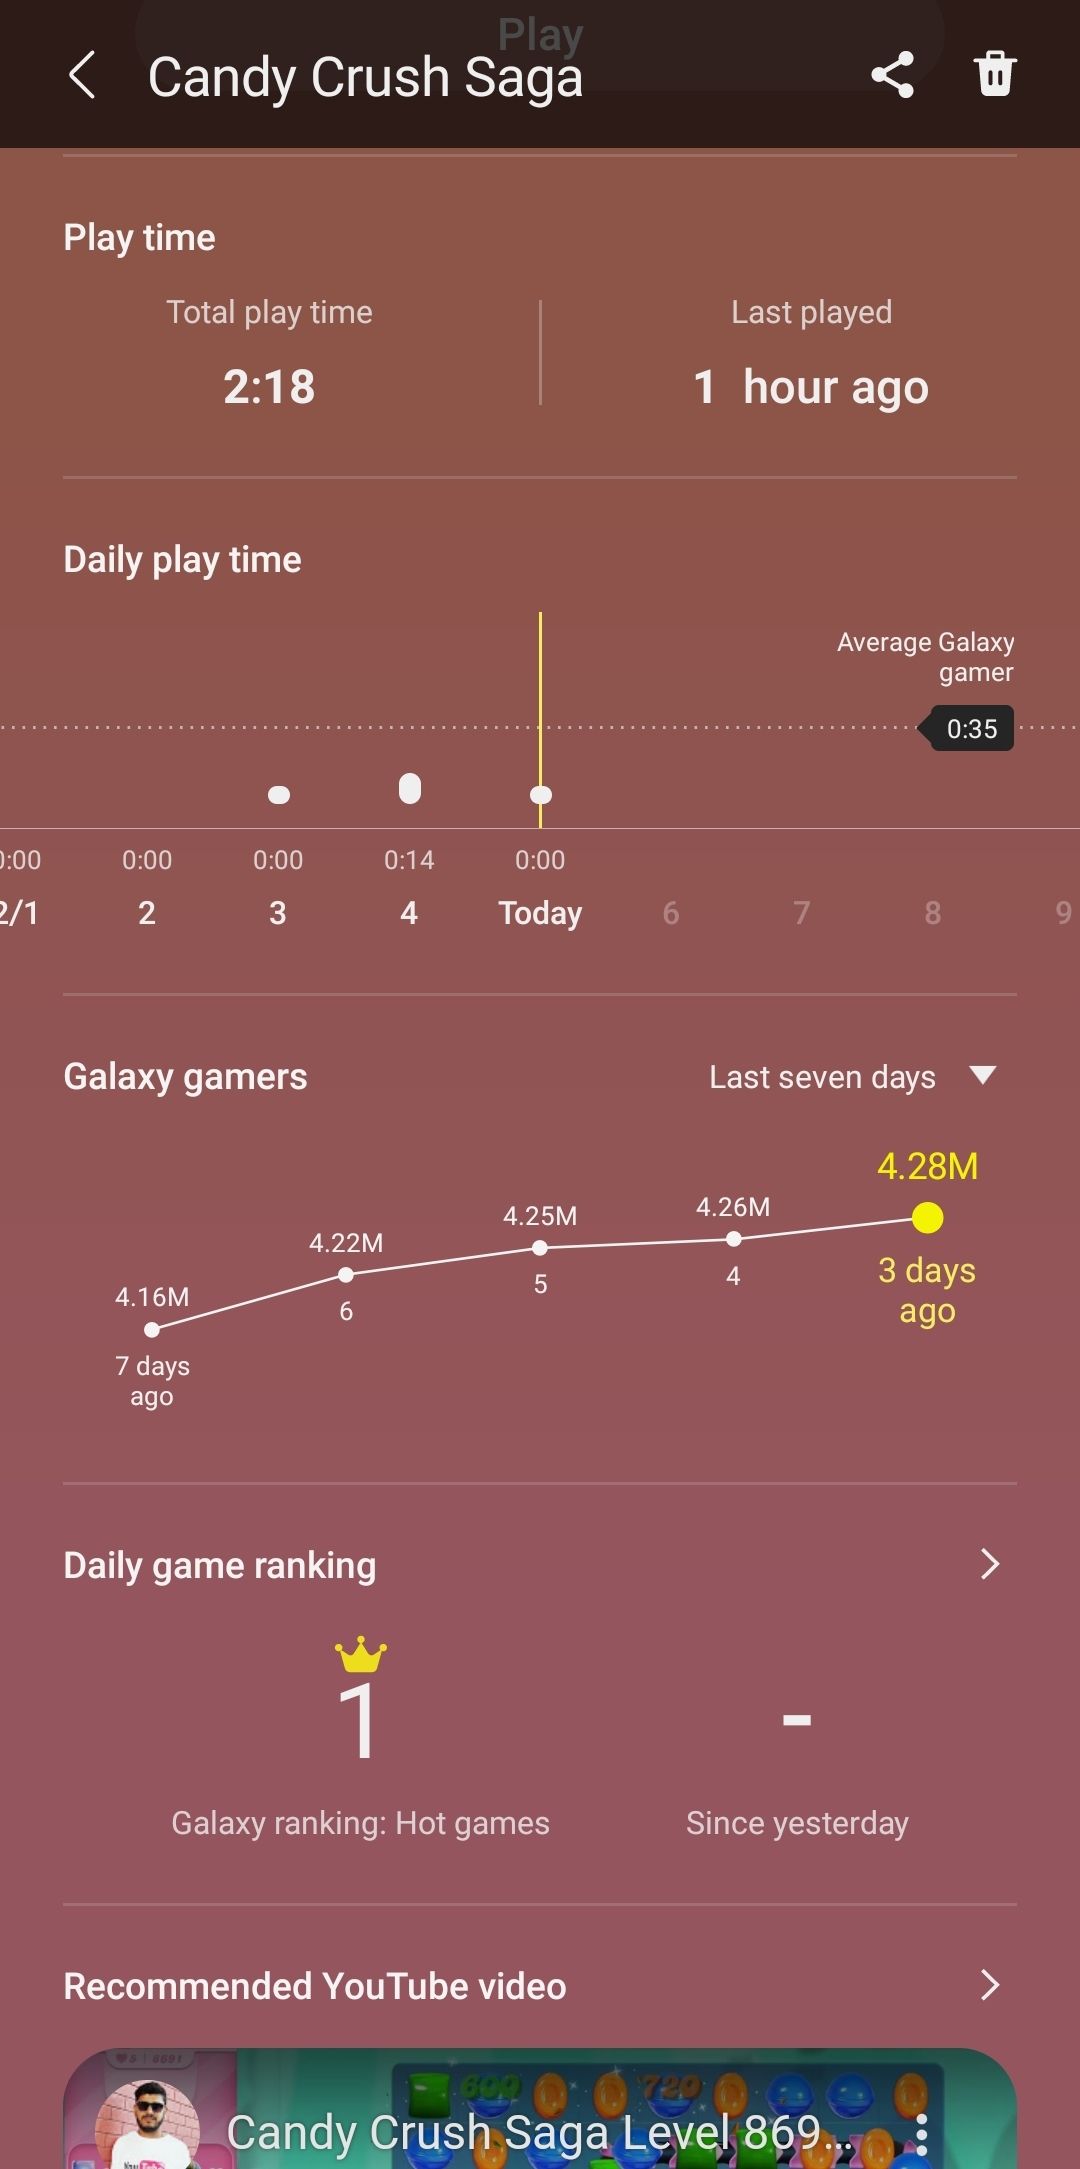 With no friends network, Samsung Game Launcher only compares your play to "average players"